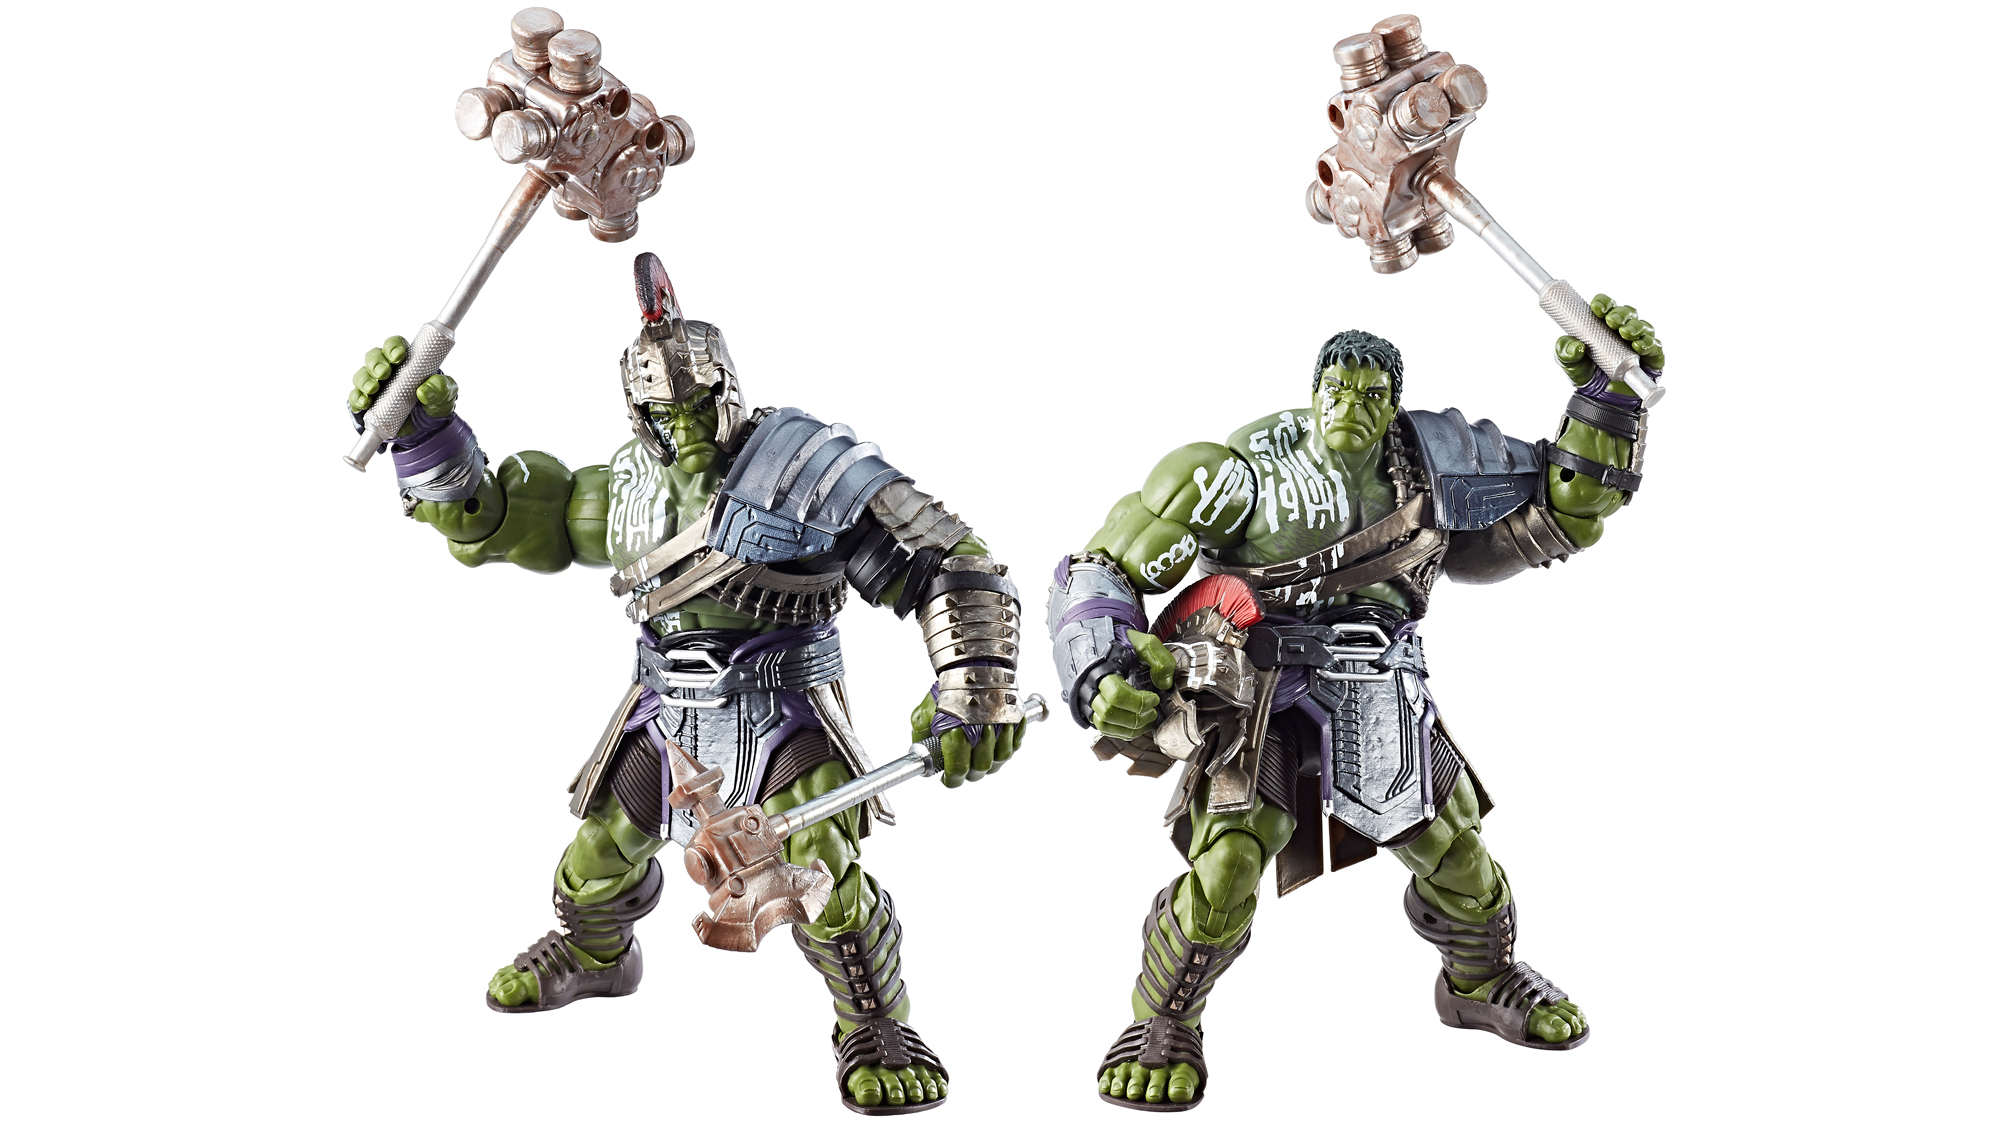 Building This Massive Gladiator Hulk Totally Justifies Buying All These Thor: Ragnarok Figures